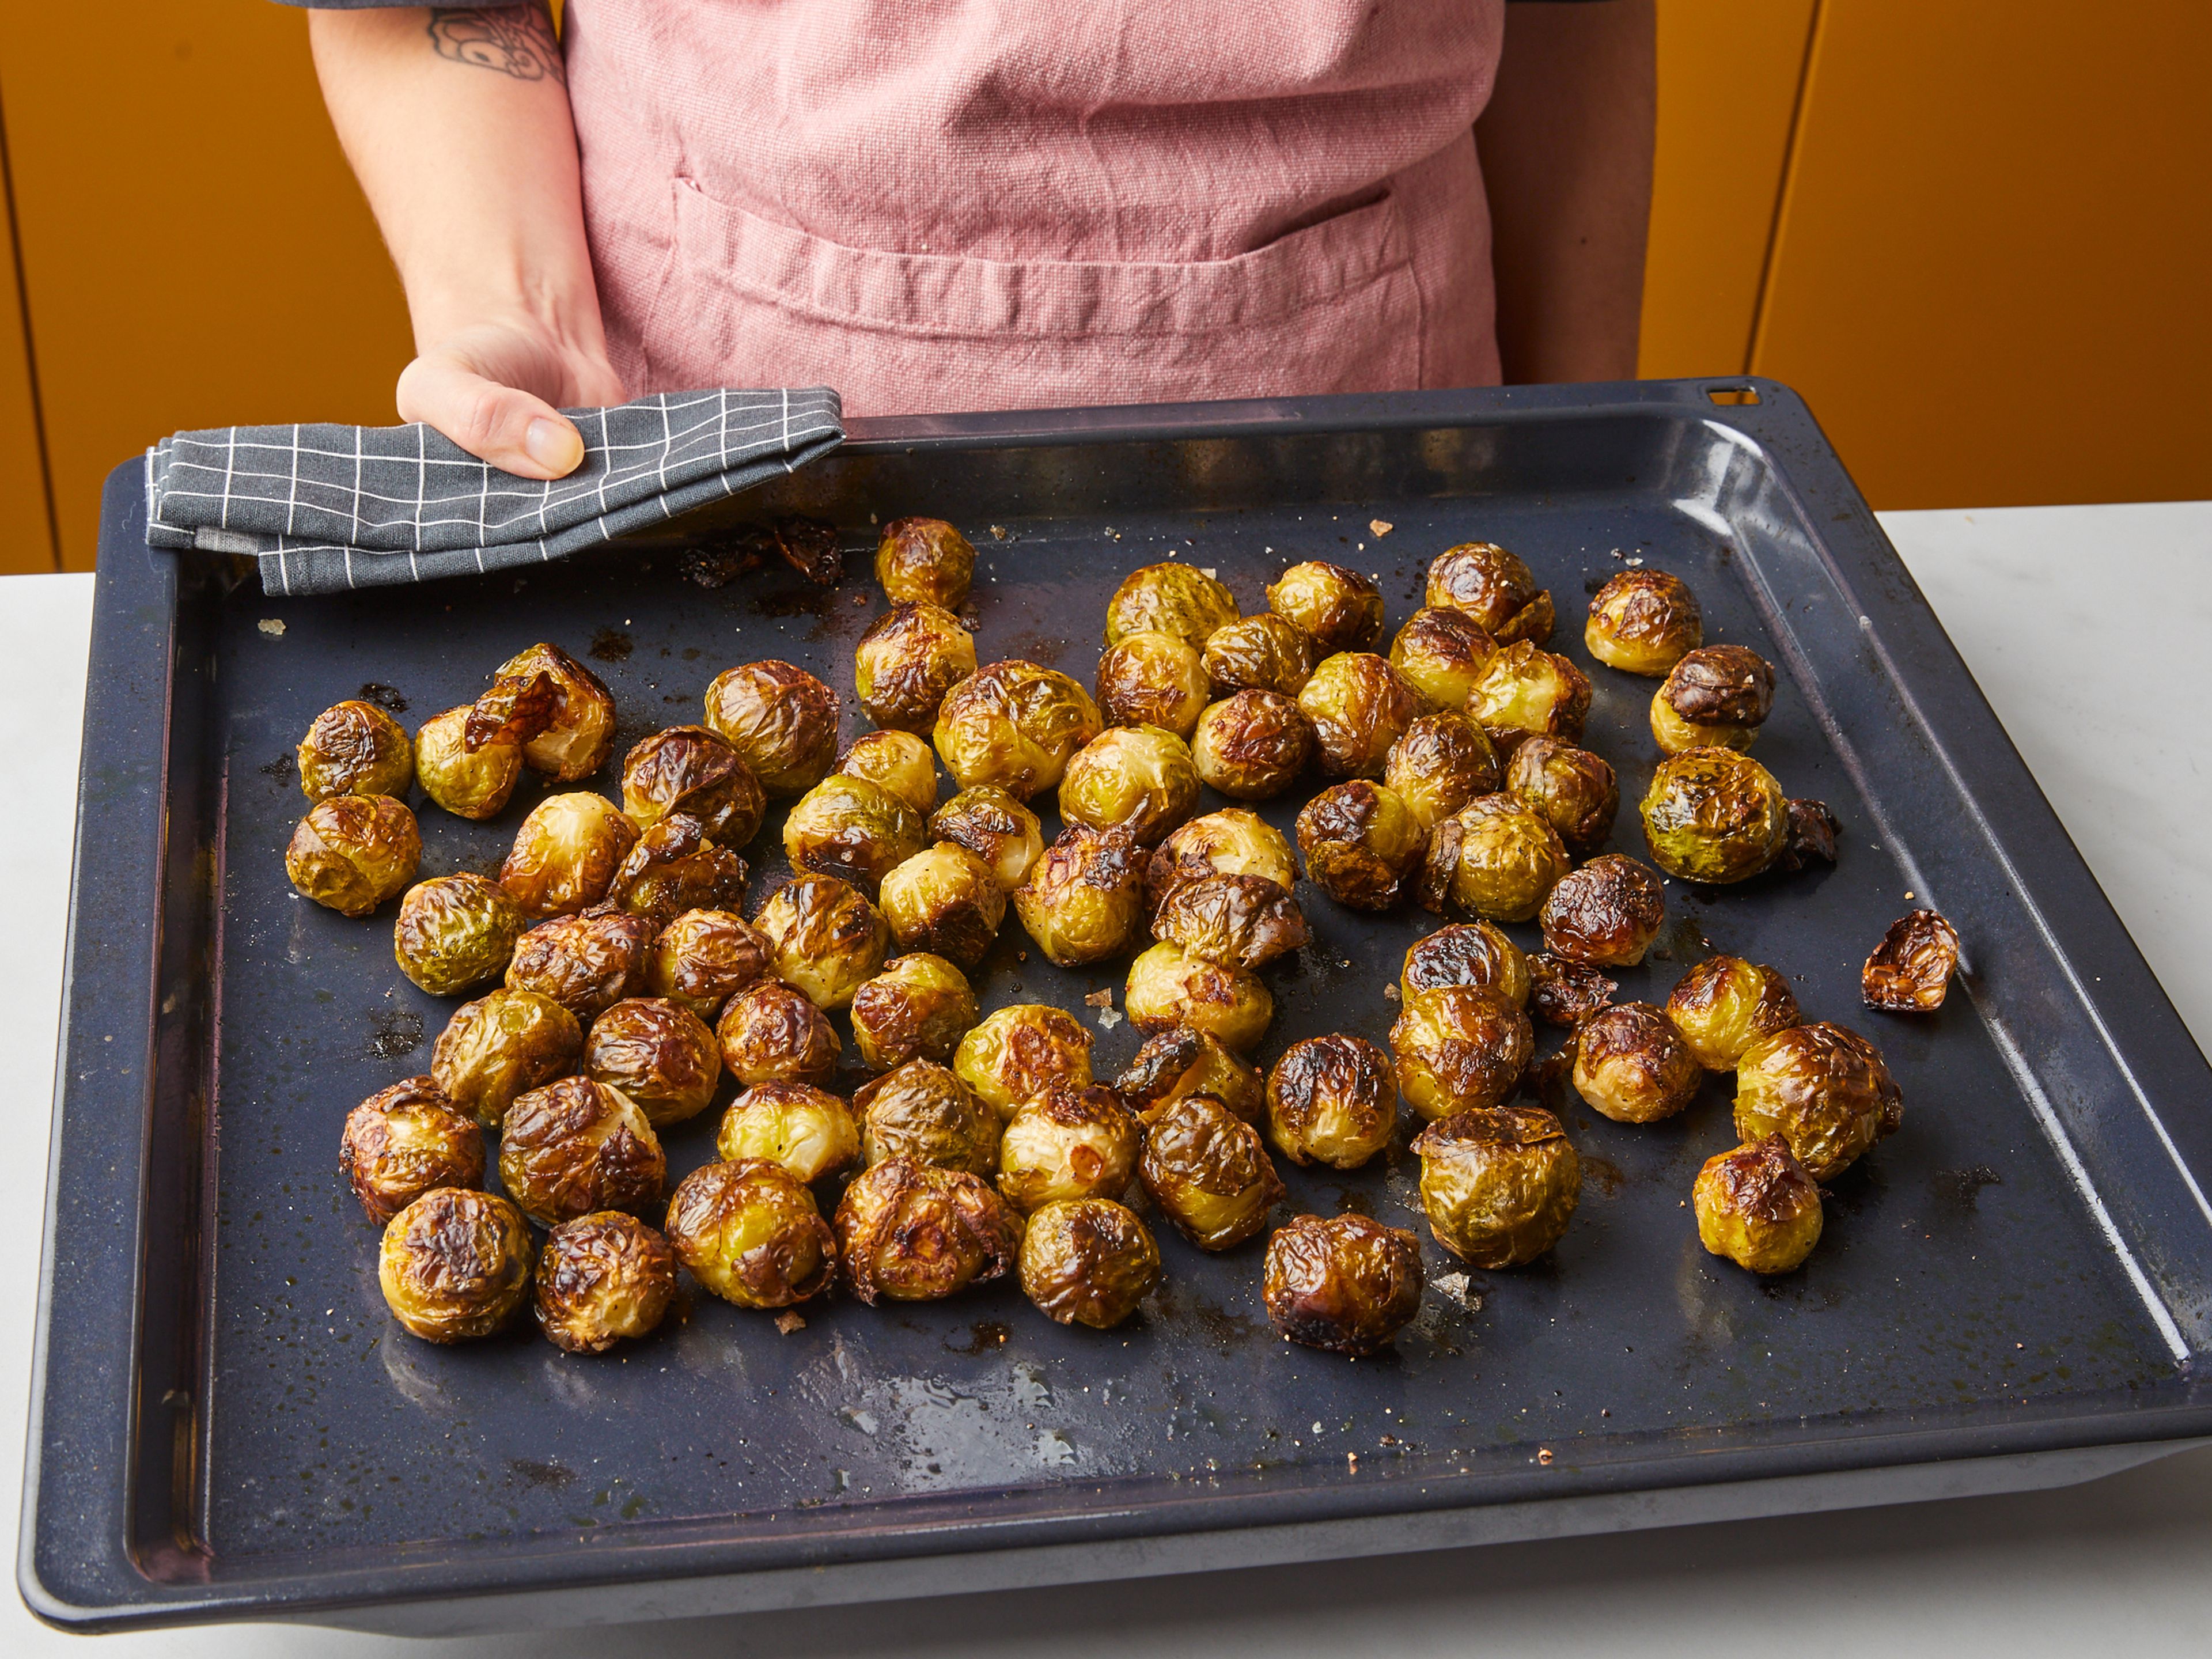 Roast brussels sprouts for approx. 15 min. Carefully shake the baking sheet to move the sprouts around and continue to roast for approx. 10 min. more. Shake baking sheet again, reduce oven temperature to 175°C/350°F, and roast approx. 15 min. more. The Brussels sprouts should be crispy and deeply browned all over, and a paring knife should slide through the center of the sprout easily. If not, roast in 5 min. intervals until tender, then remove from the oven and set aside.